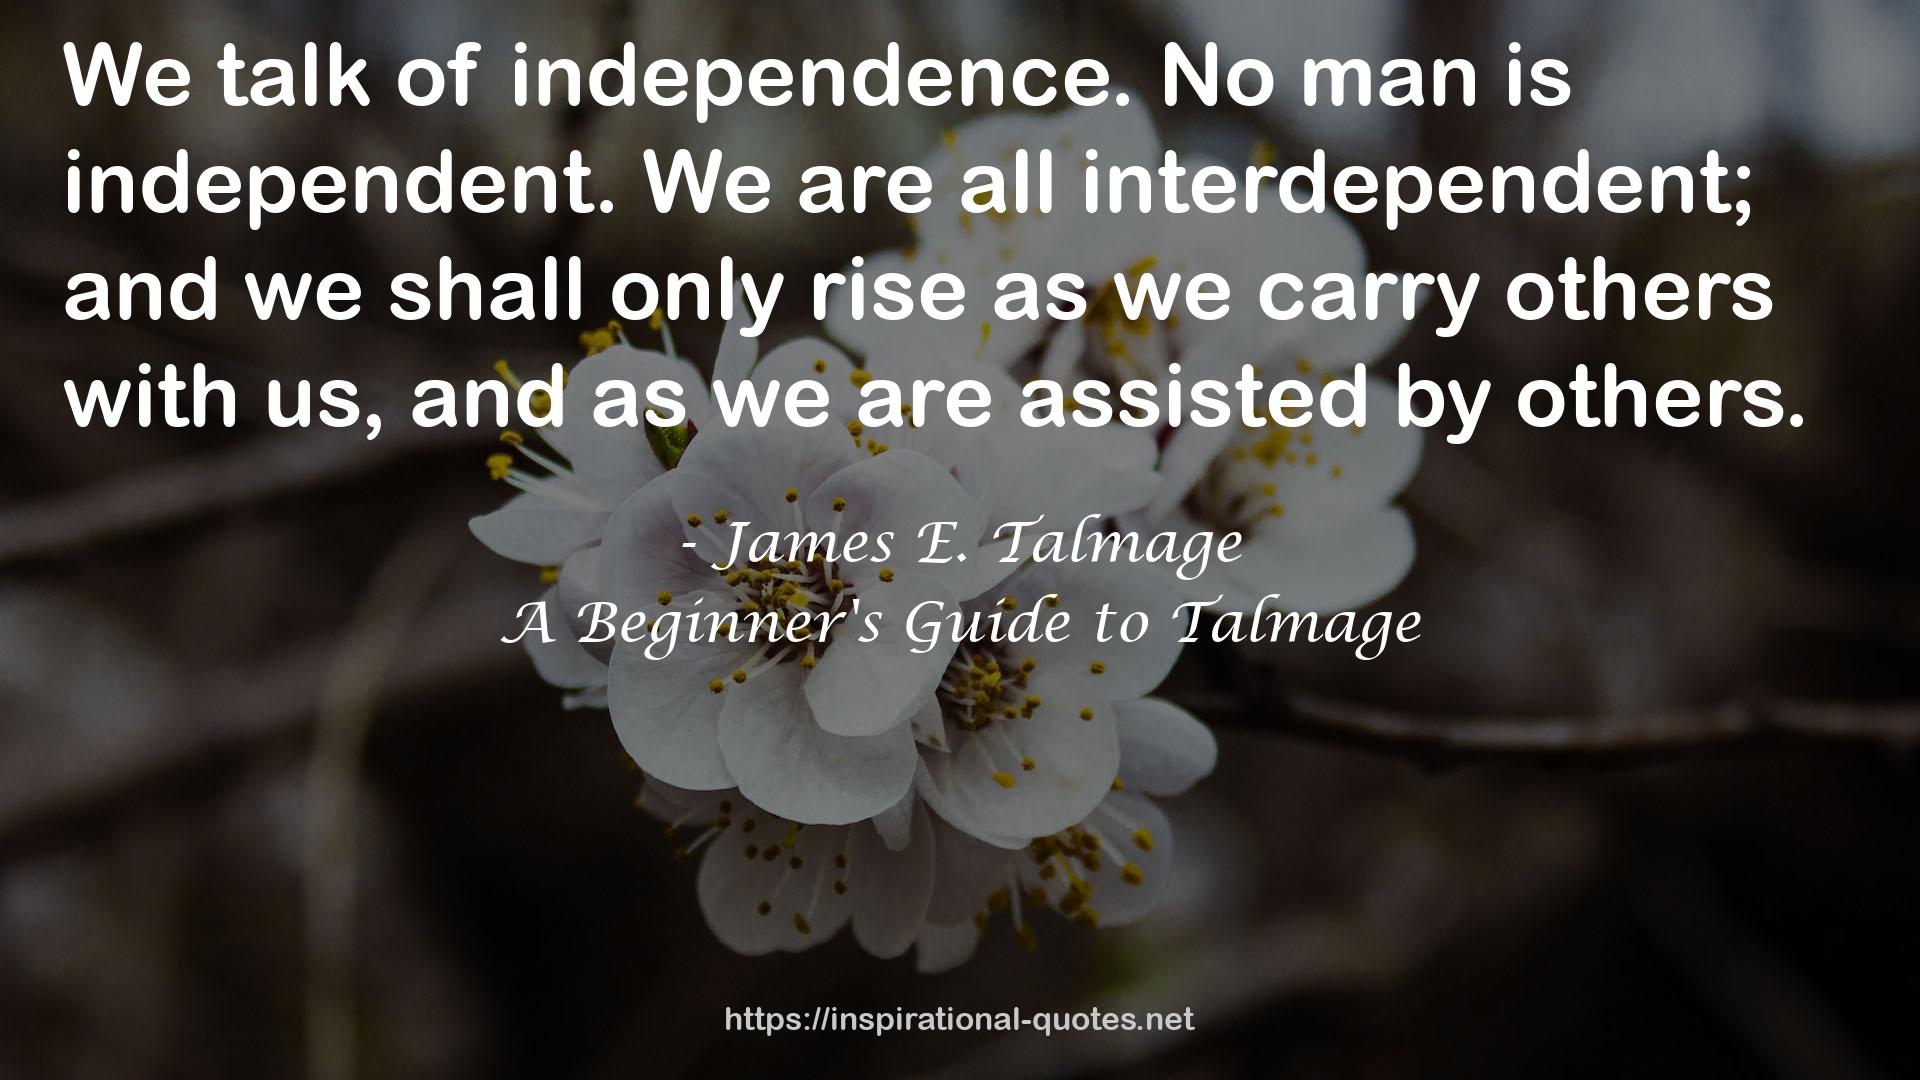 A Beginner's Guide to Talmage QUOTES